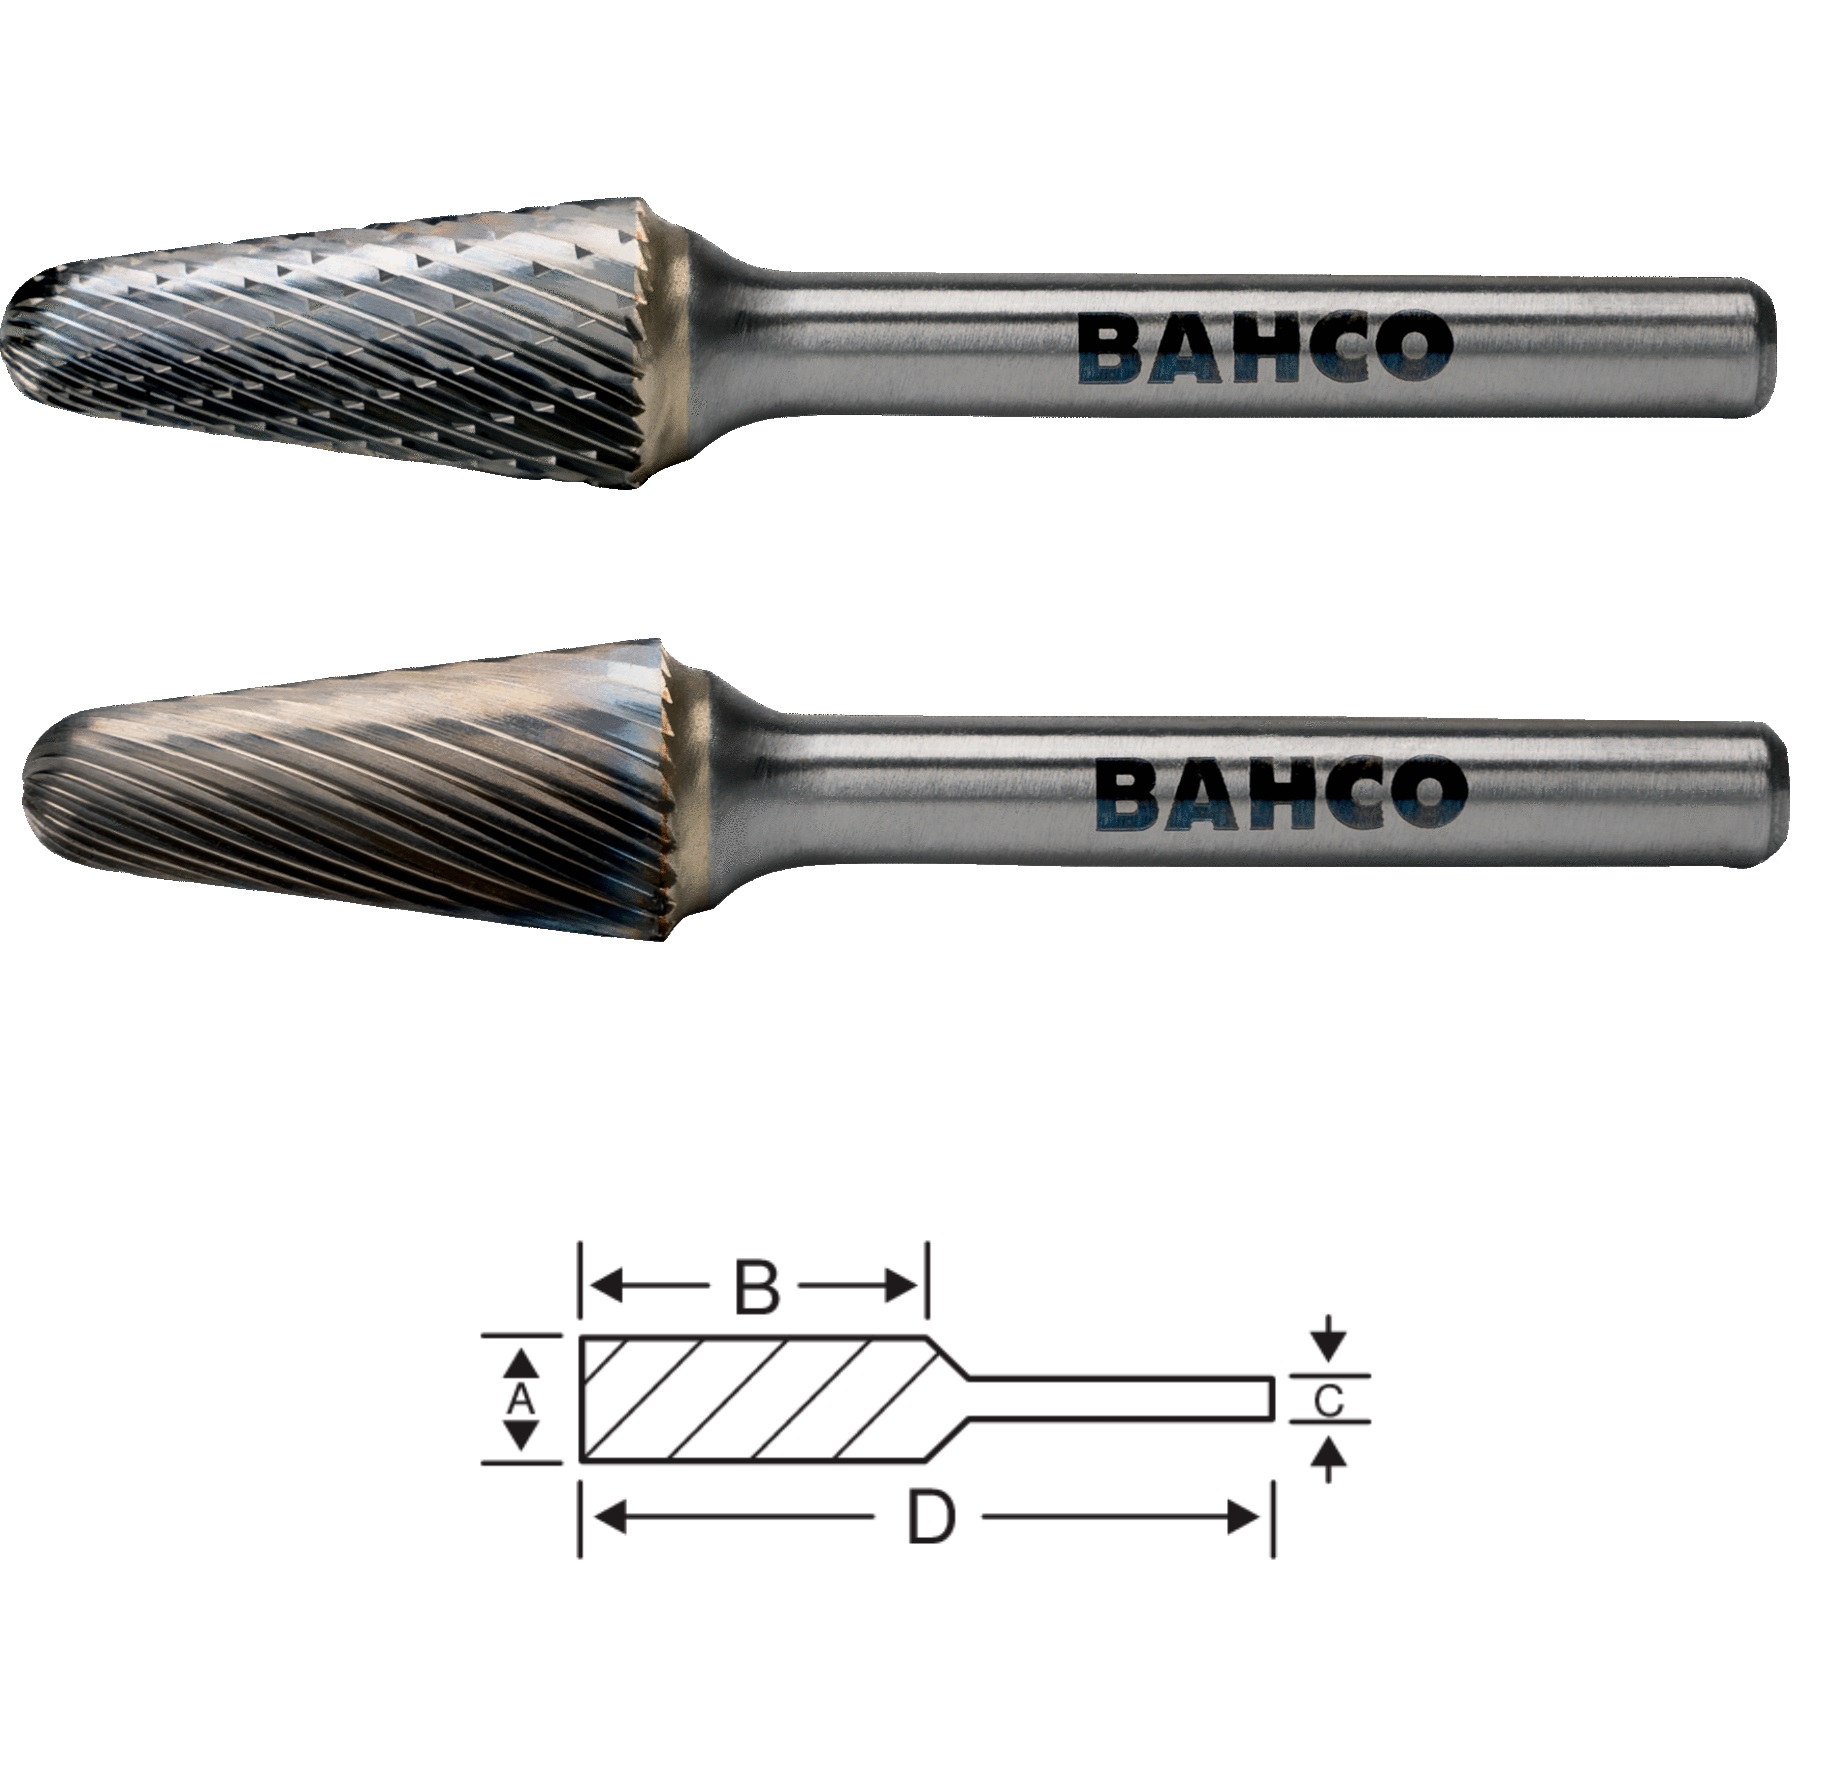 Bahco-Conical Rotary Burrs-MKS